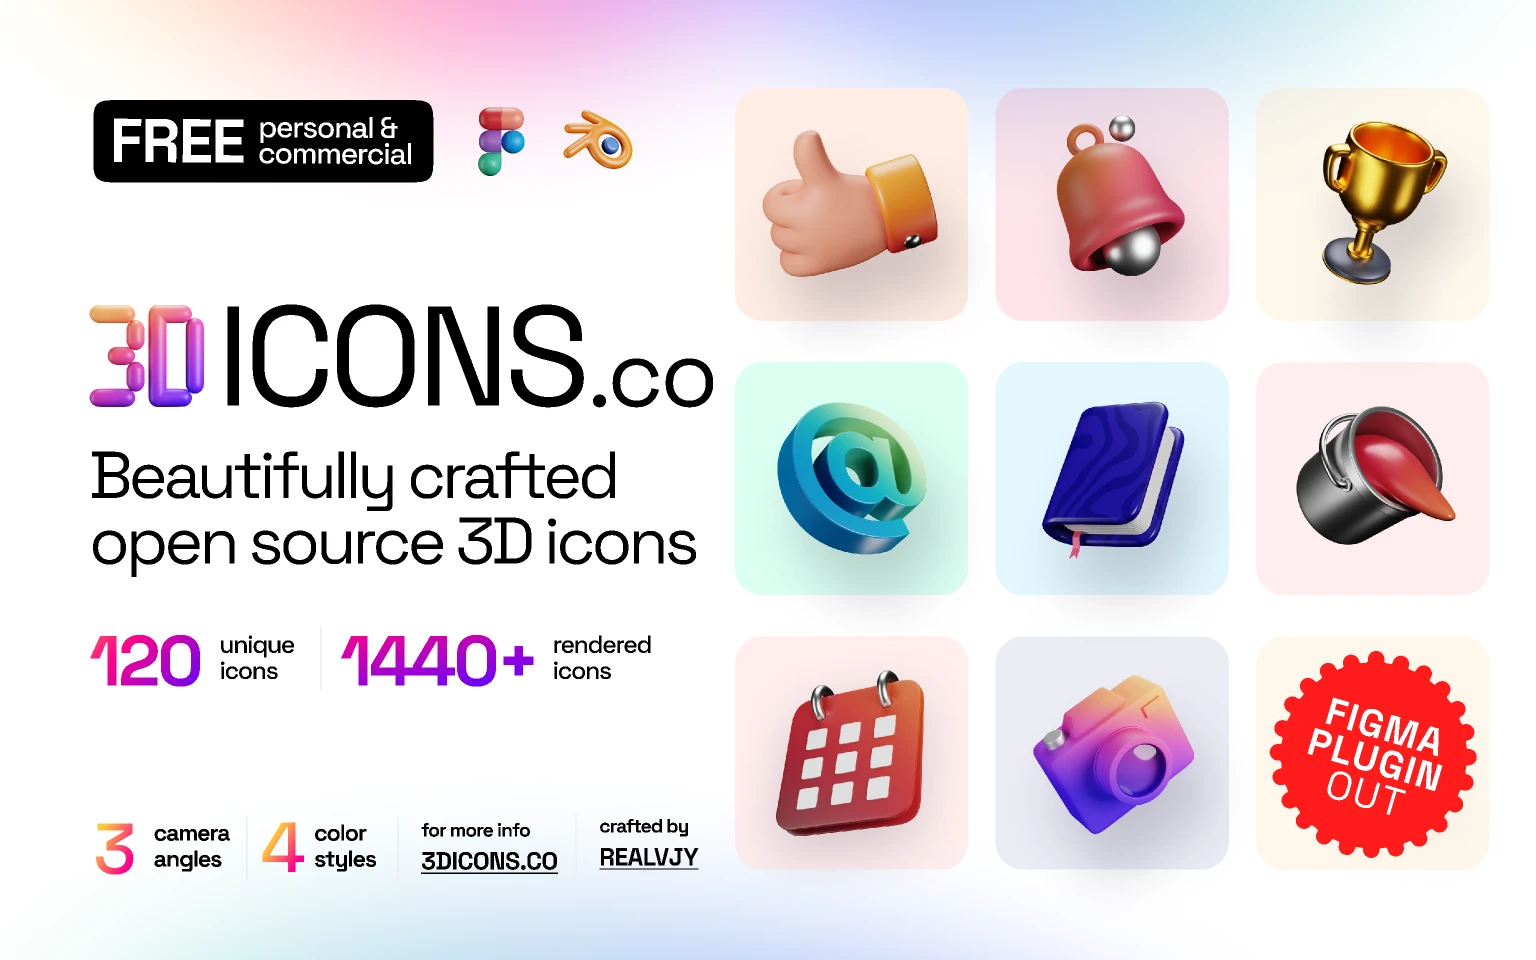 3dicons - Open source 3D icon library for Figma and Adobe XD